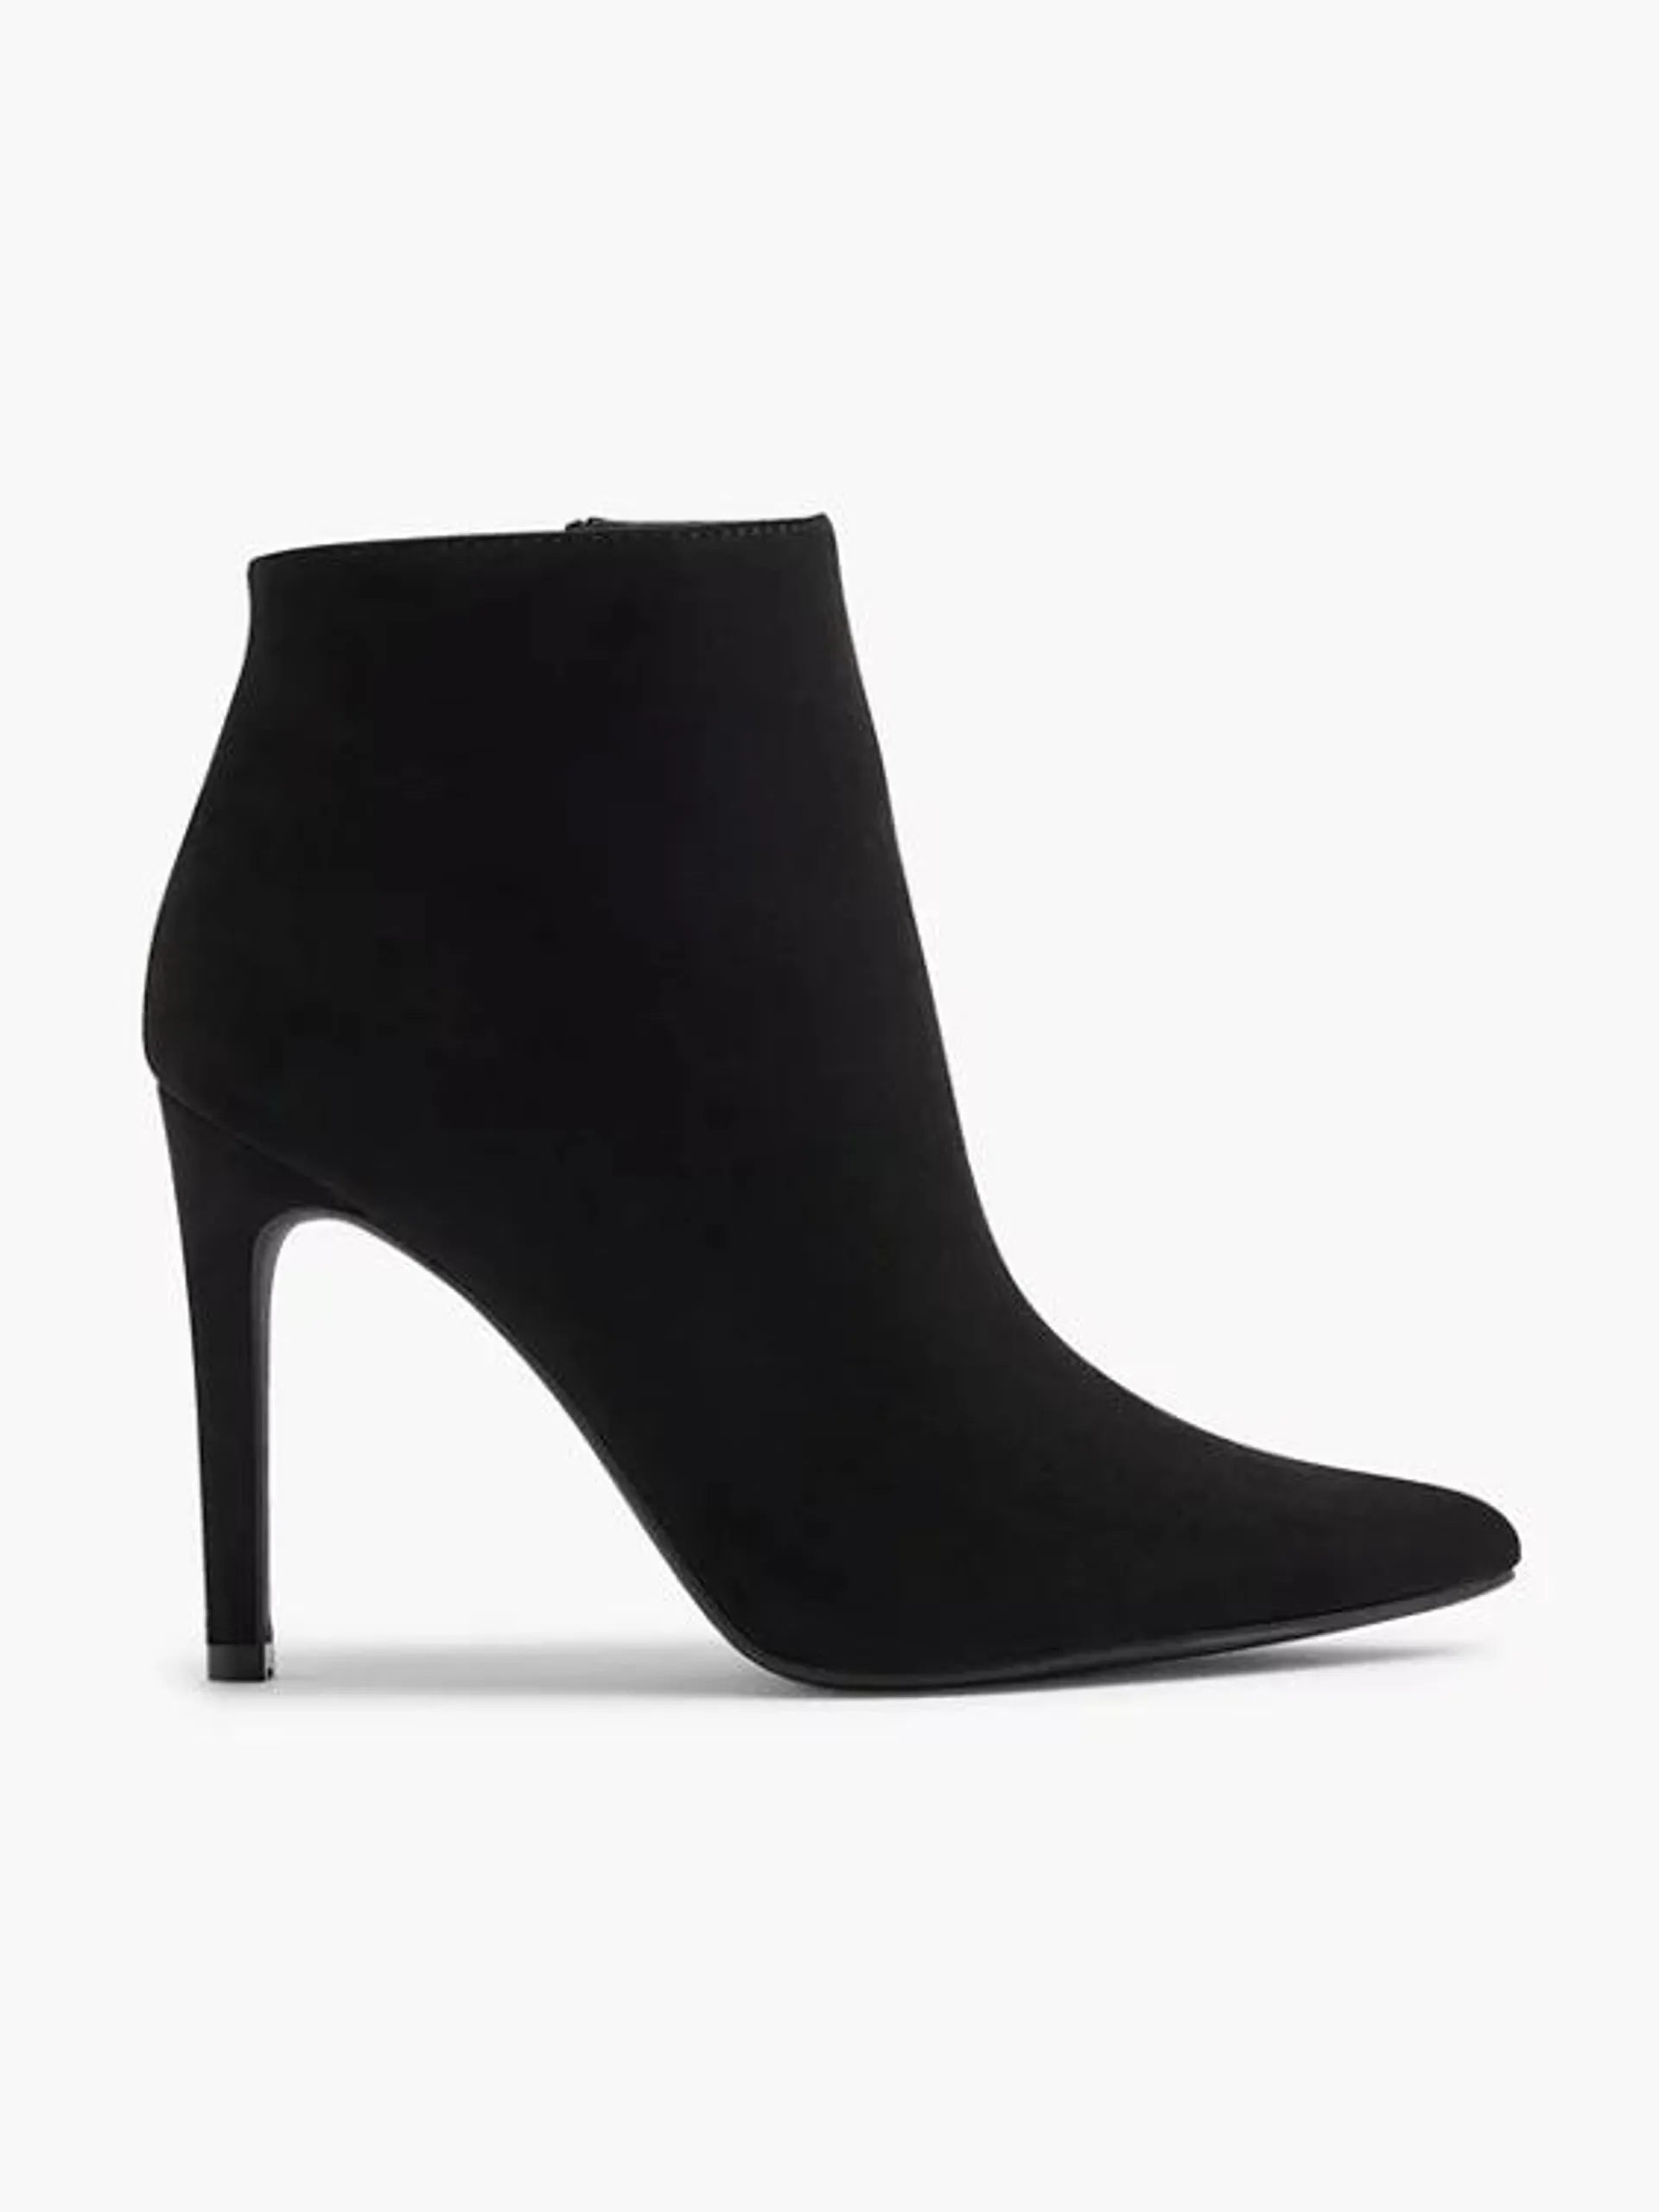 Black Suede Stiletto High Heeled Ankle Boot